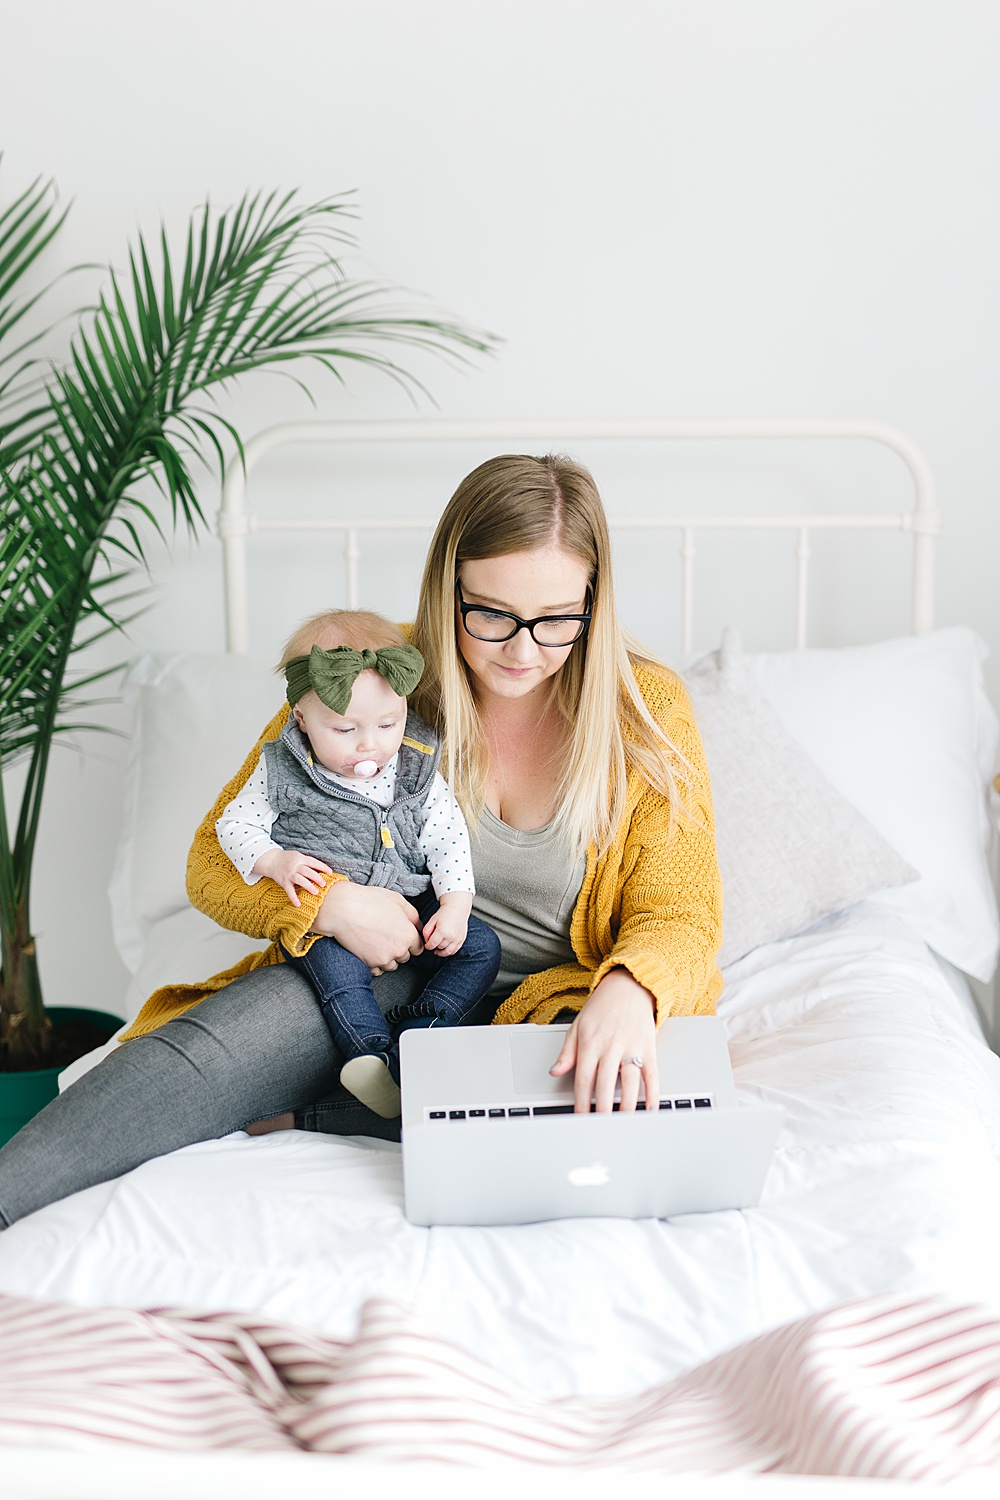 Work from home mom jobs